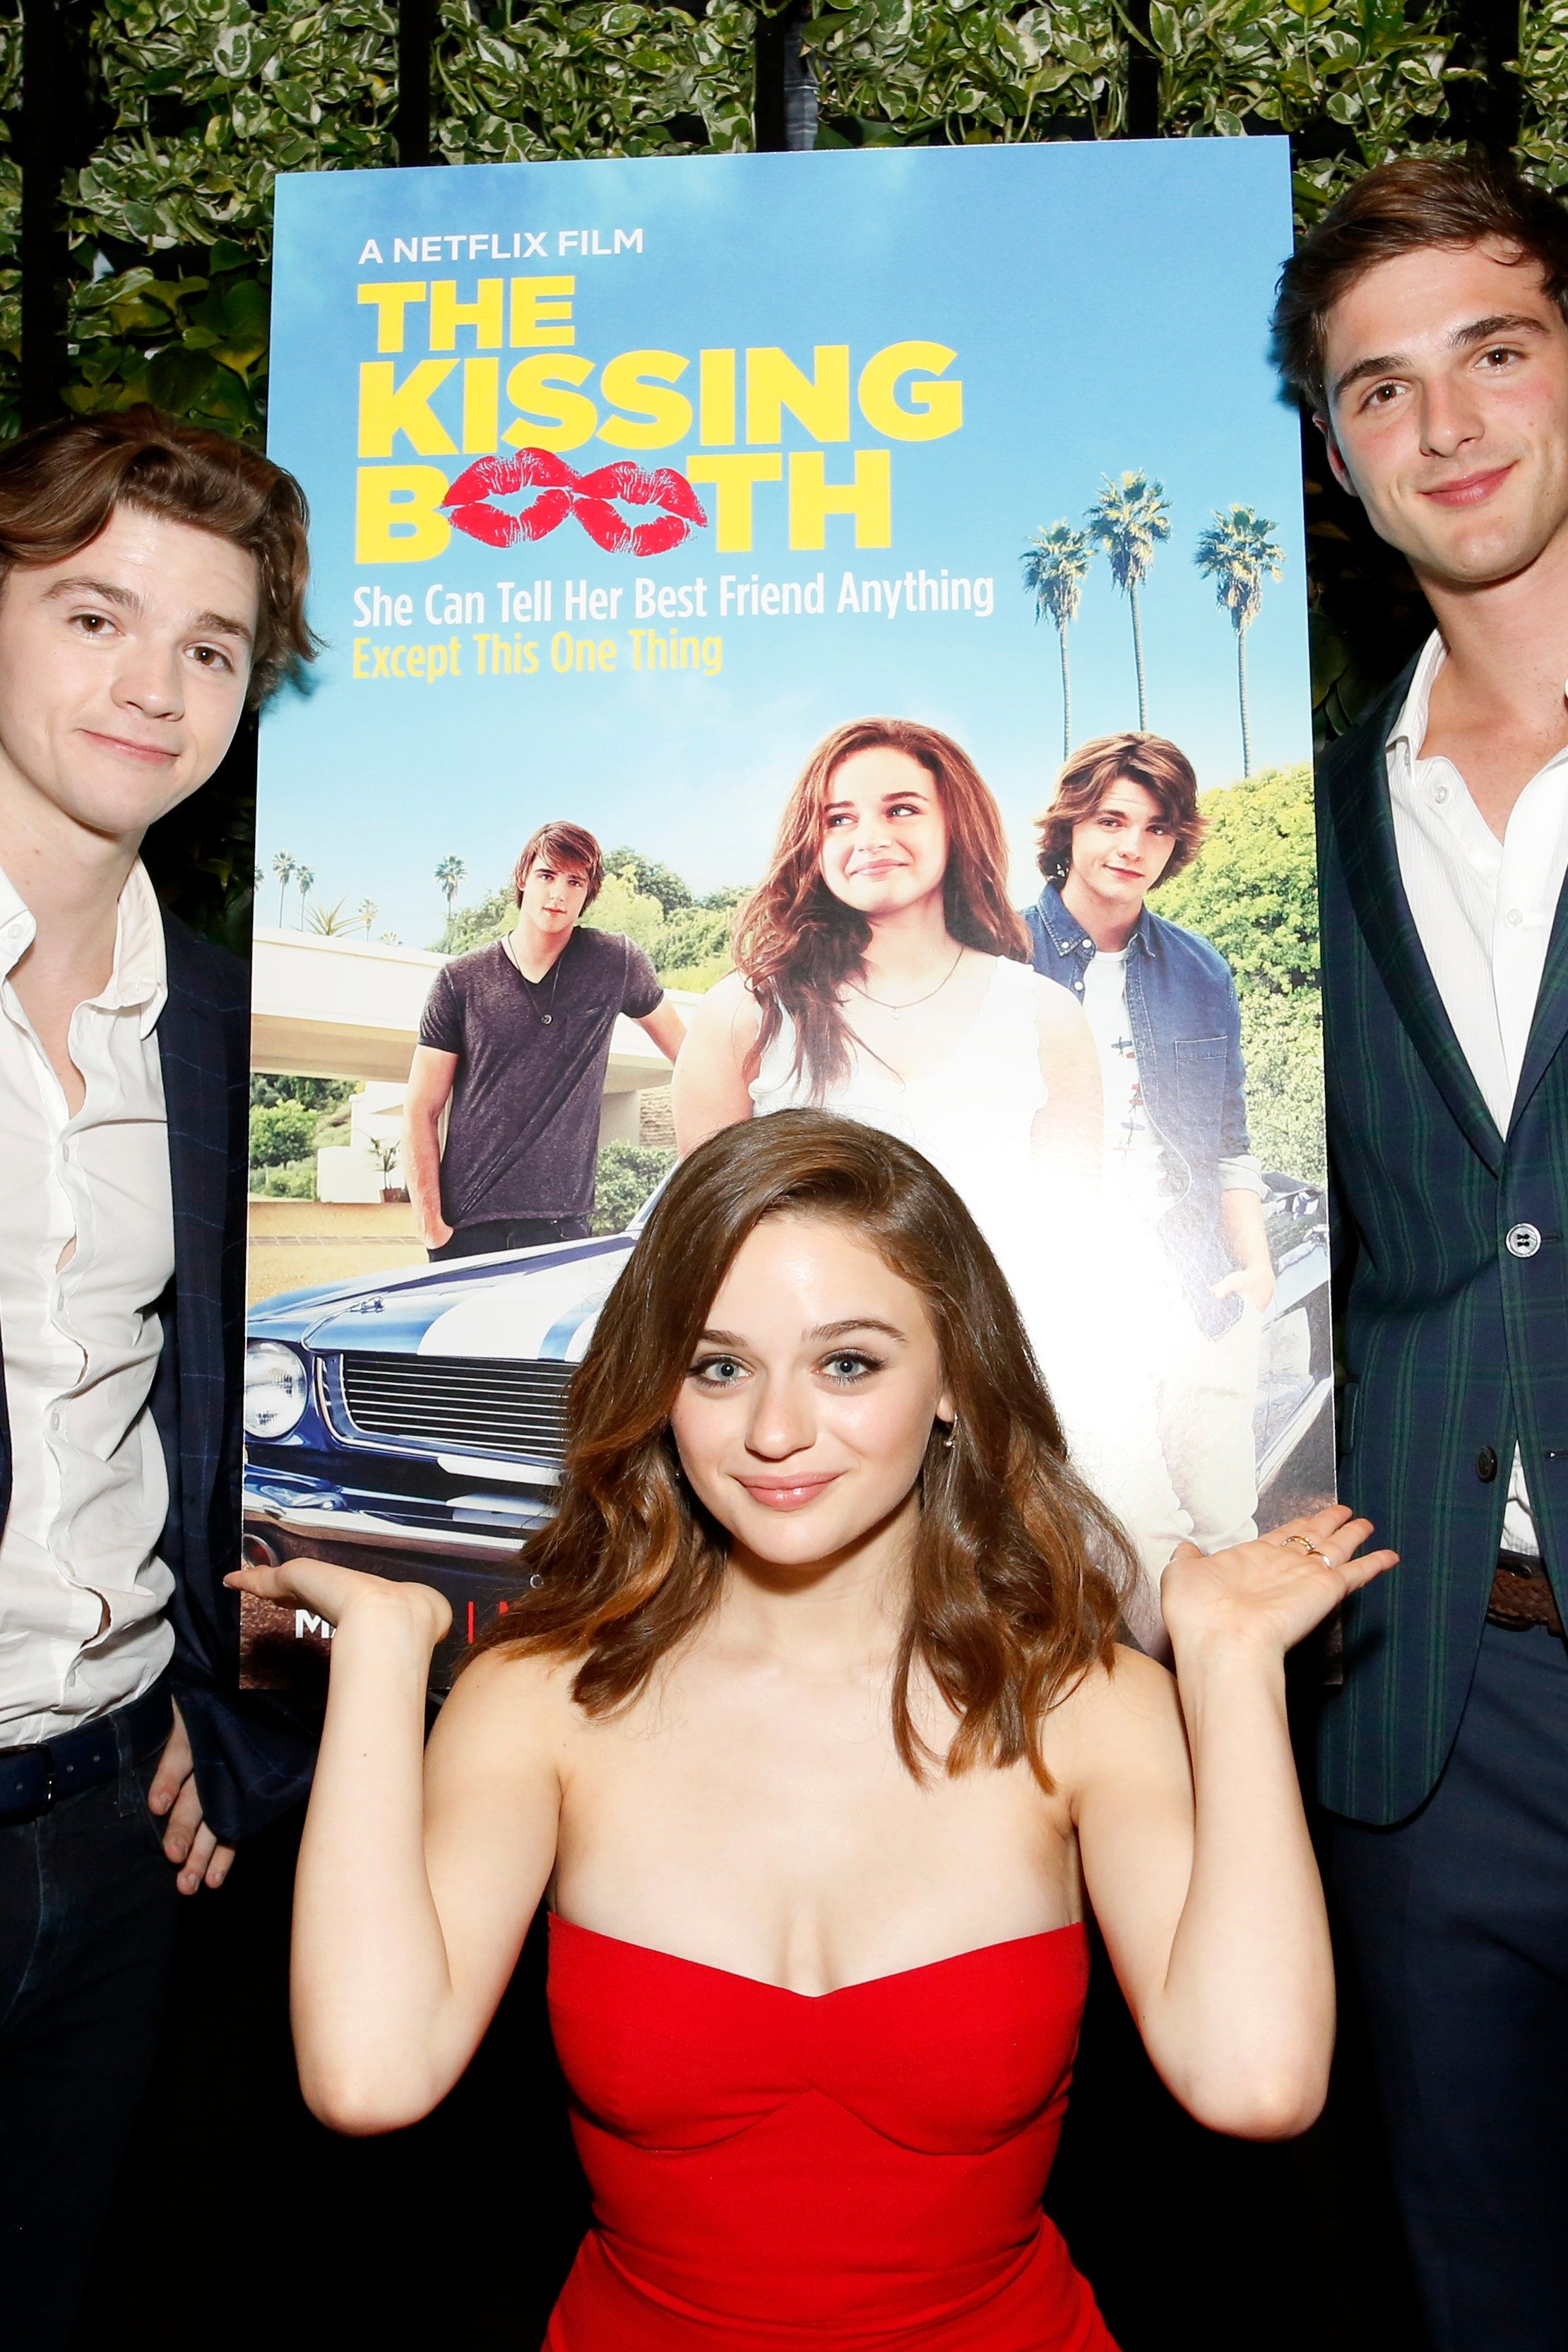 Jacob Elordi Is Officially Returning for The Kissing Booth 2